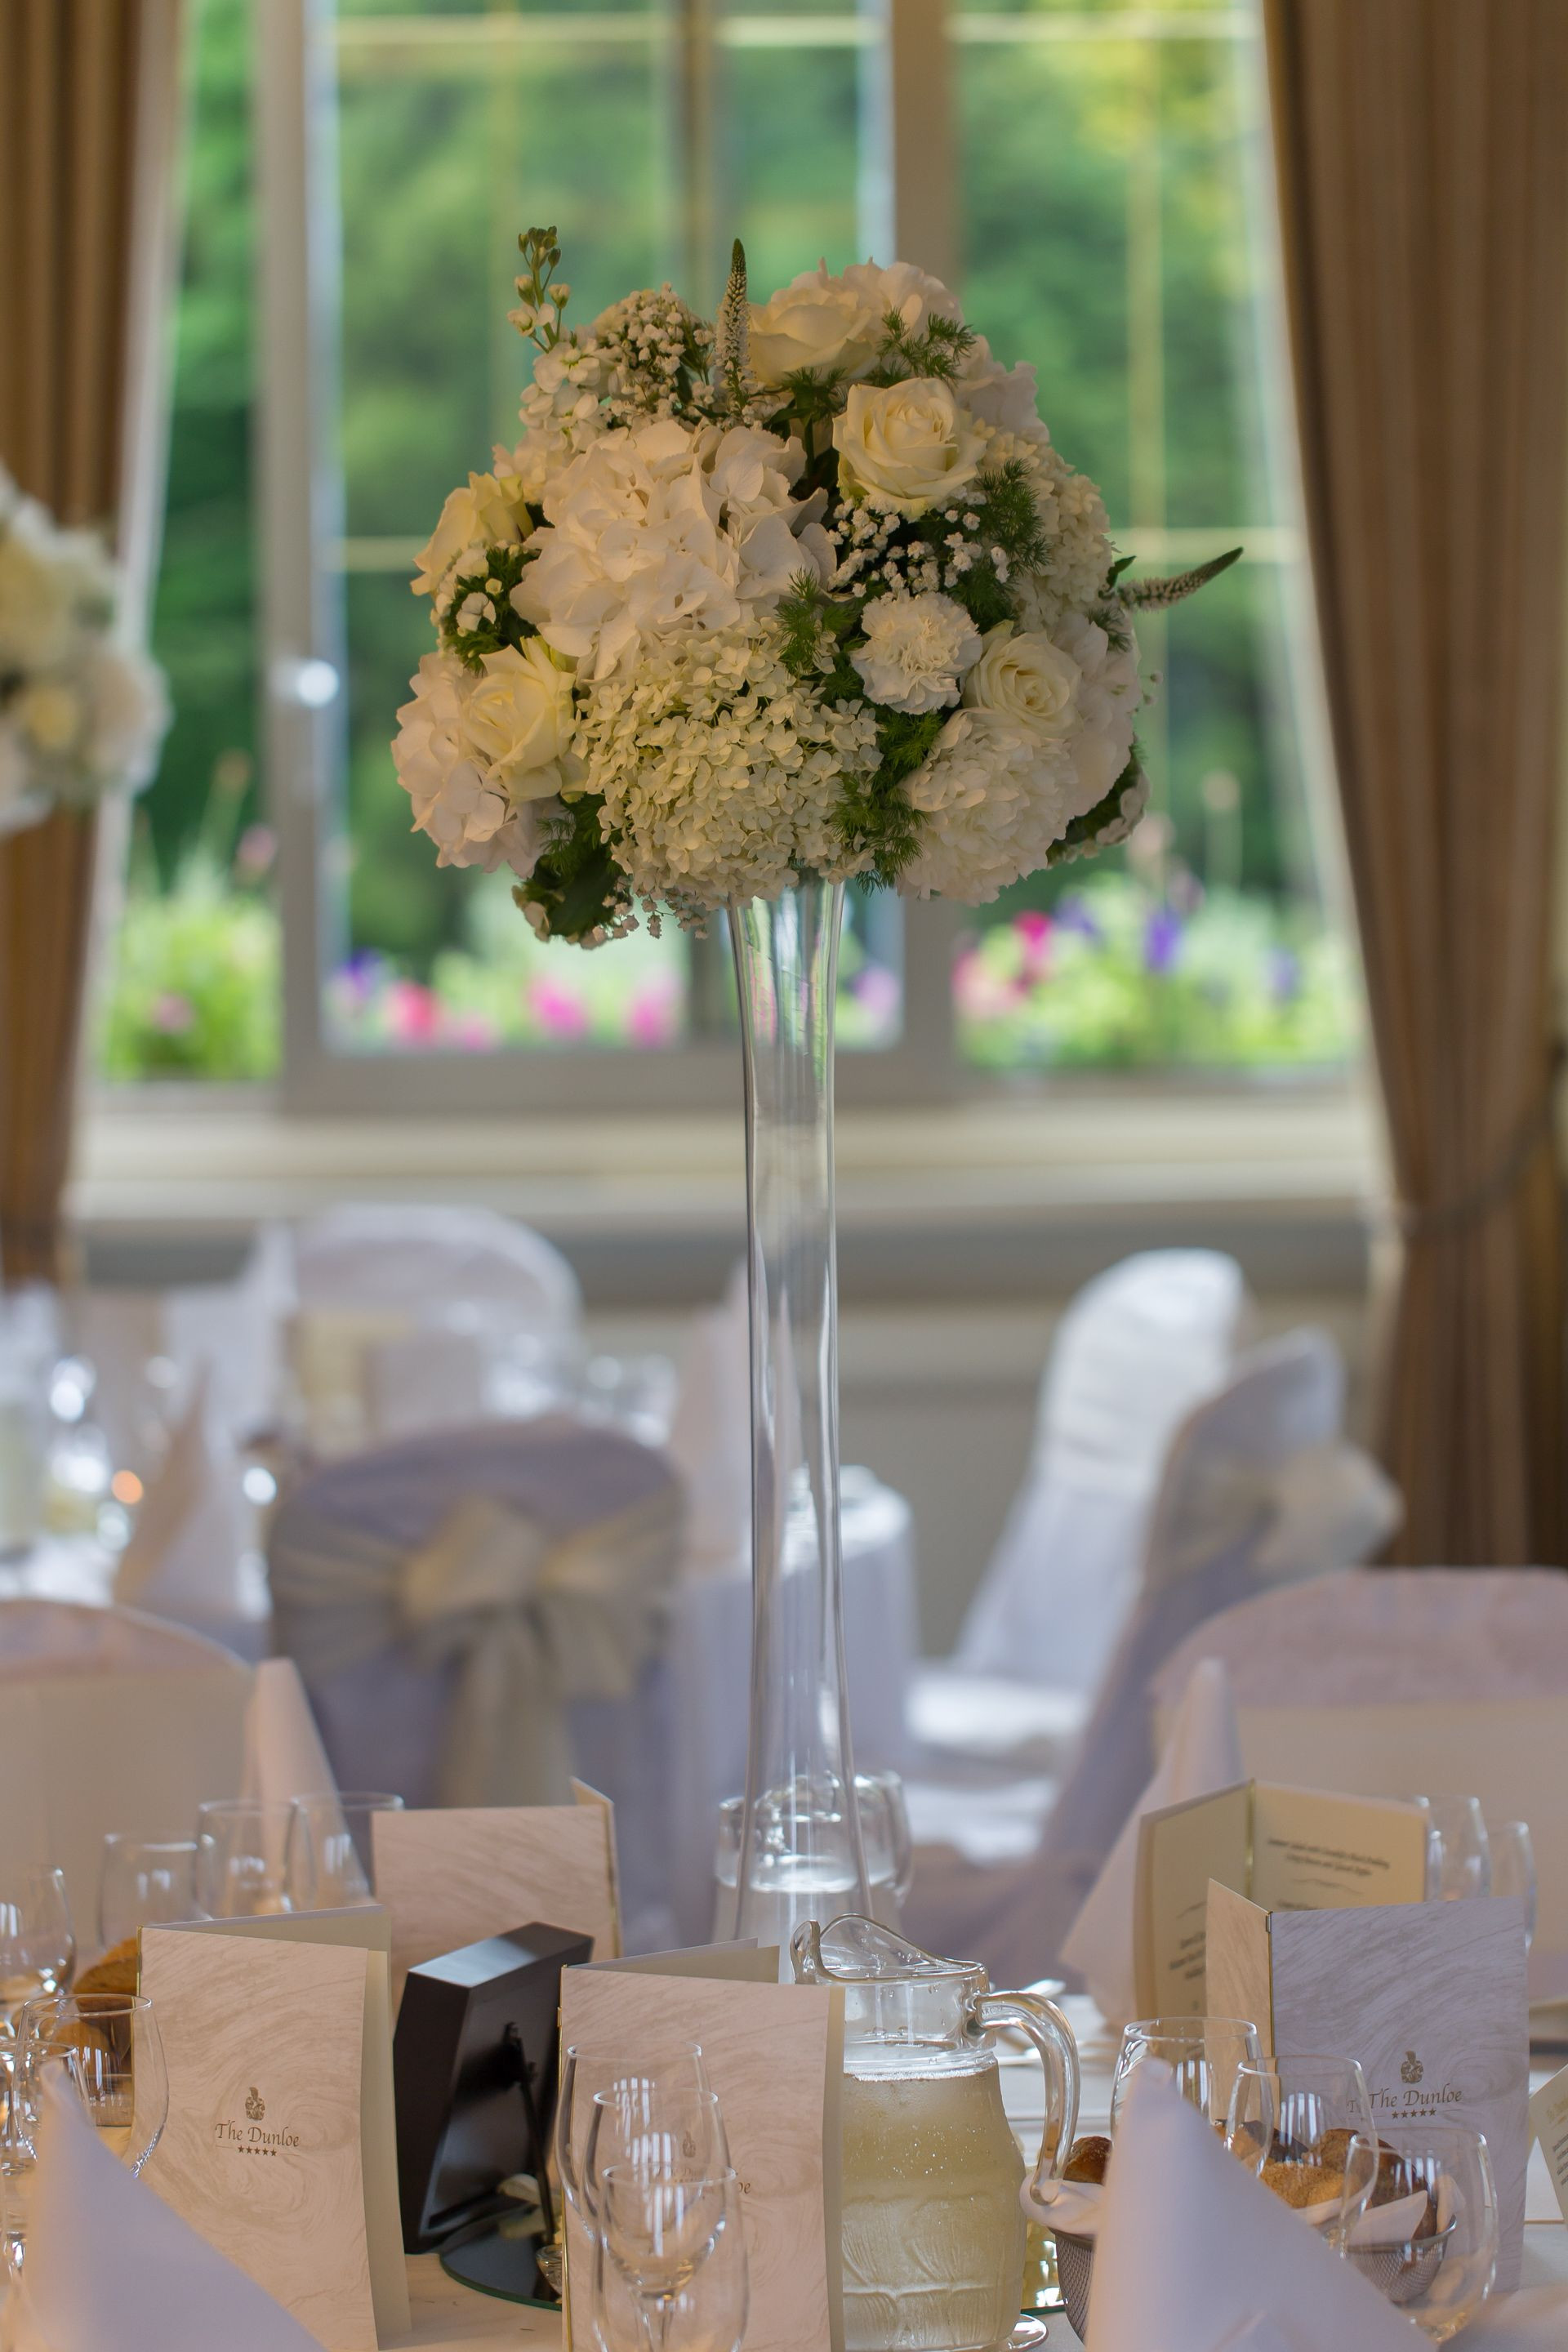 10 Ideal Tall Vases for Wedding Reception Centerpieces 2024 free download tall vases for wedding reception centerpieces of tall glass vase centerpiece with hydrangeas service providers intended for tall glass vase centerpiece with hydrangeas